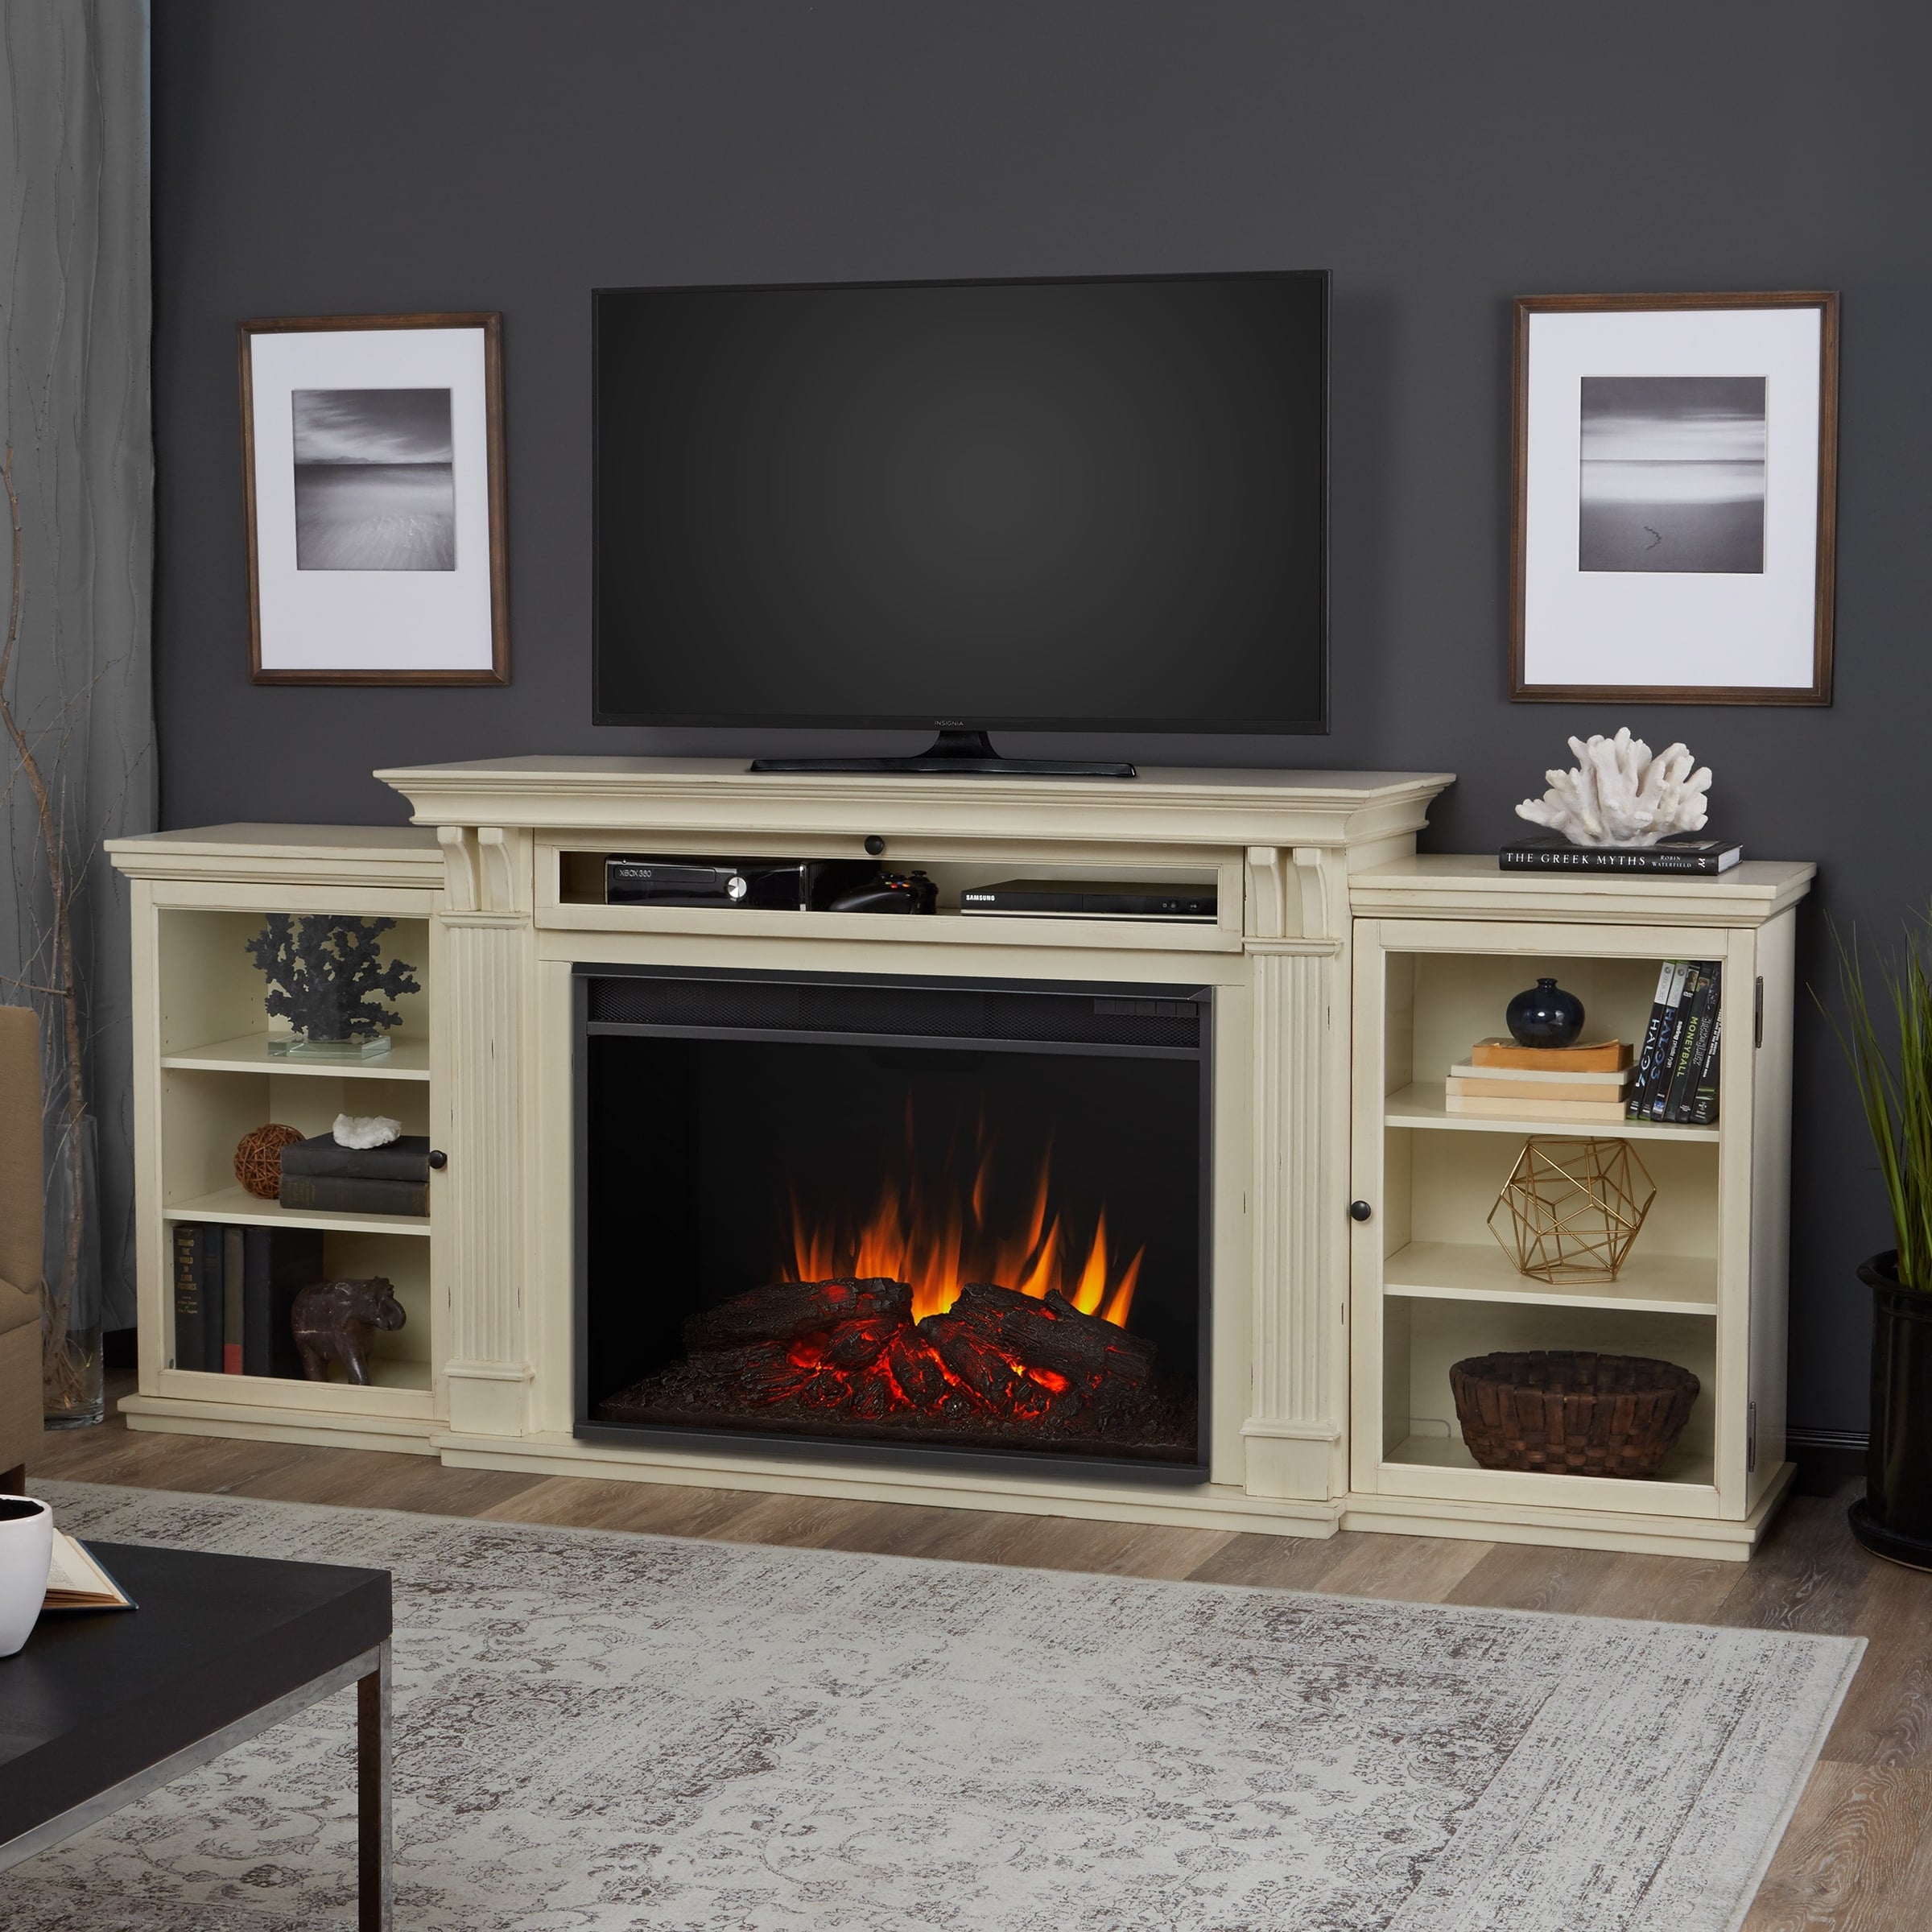 Tracey 84" TV Stand Electric Fireplace in Distressed White by Real Flame